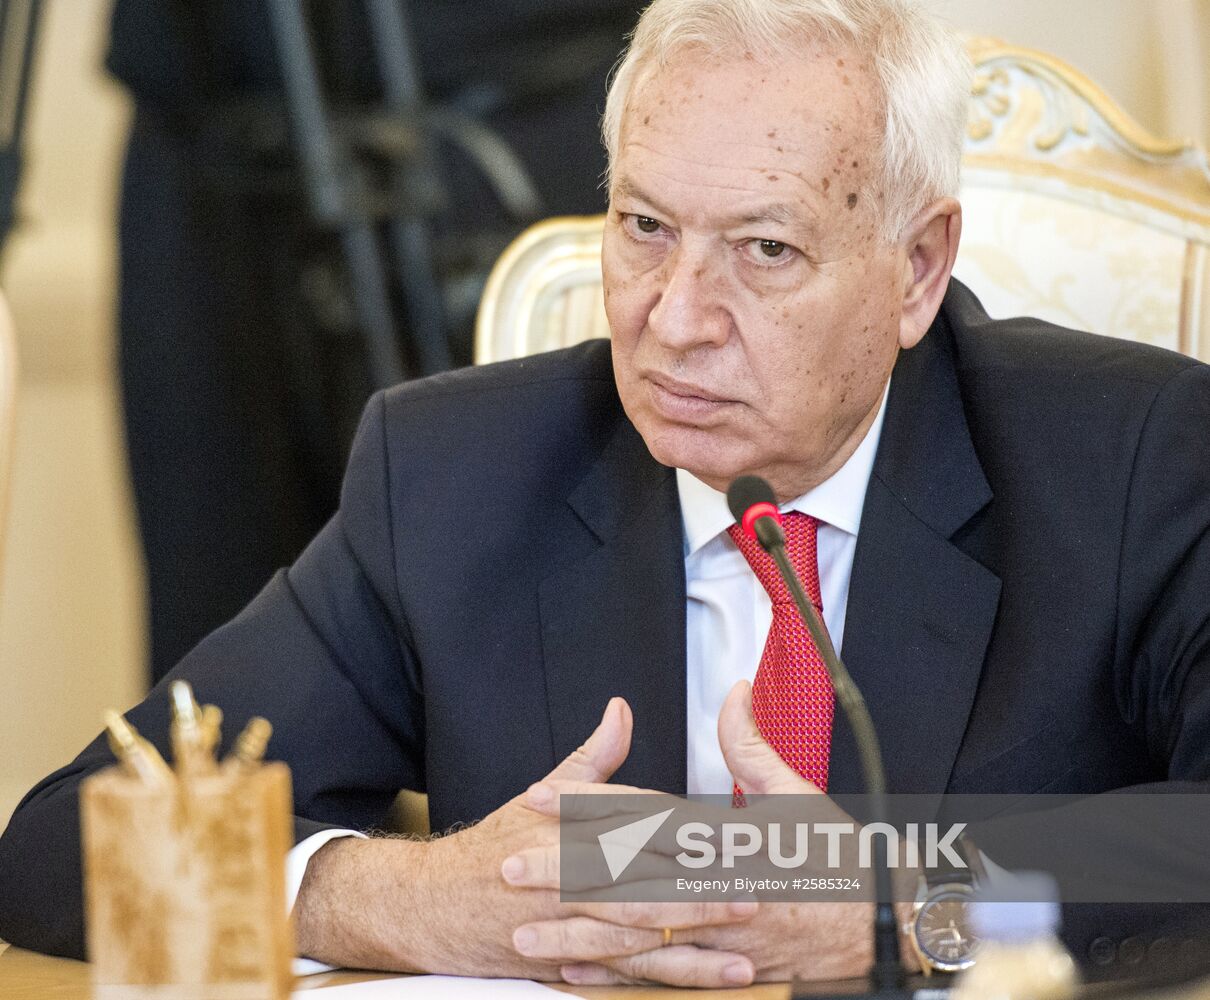 Russian Foreign Minister Sergey Lavrov meets with Spanish Foreign Minister Jose Manuel Garcia-Margallo